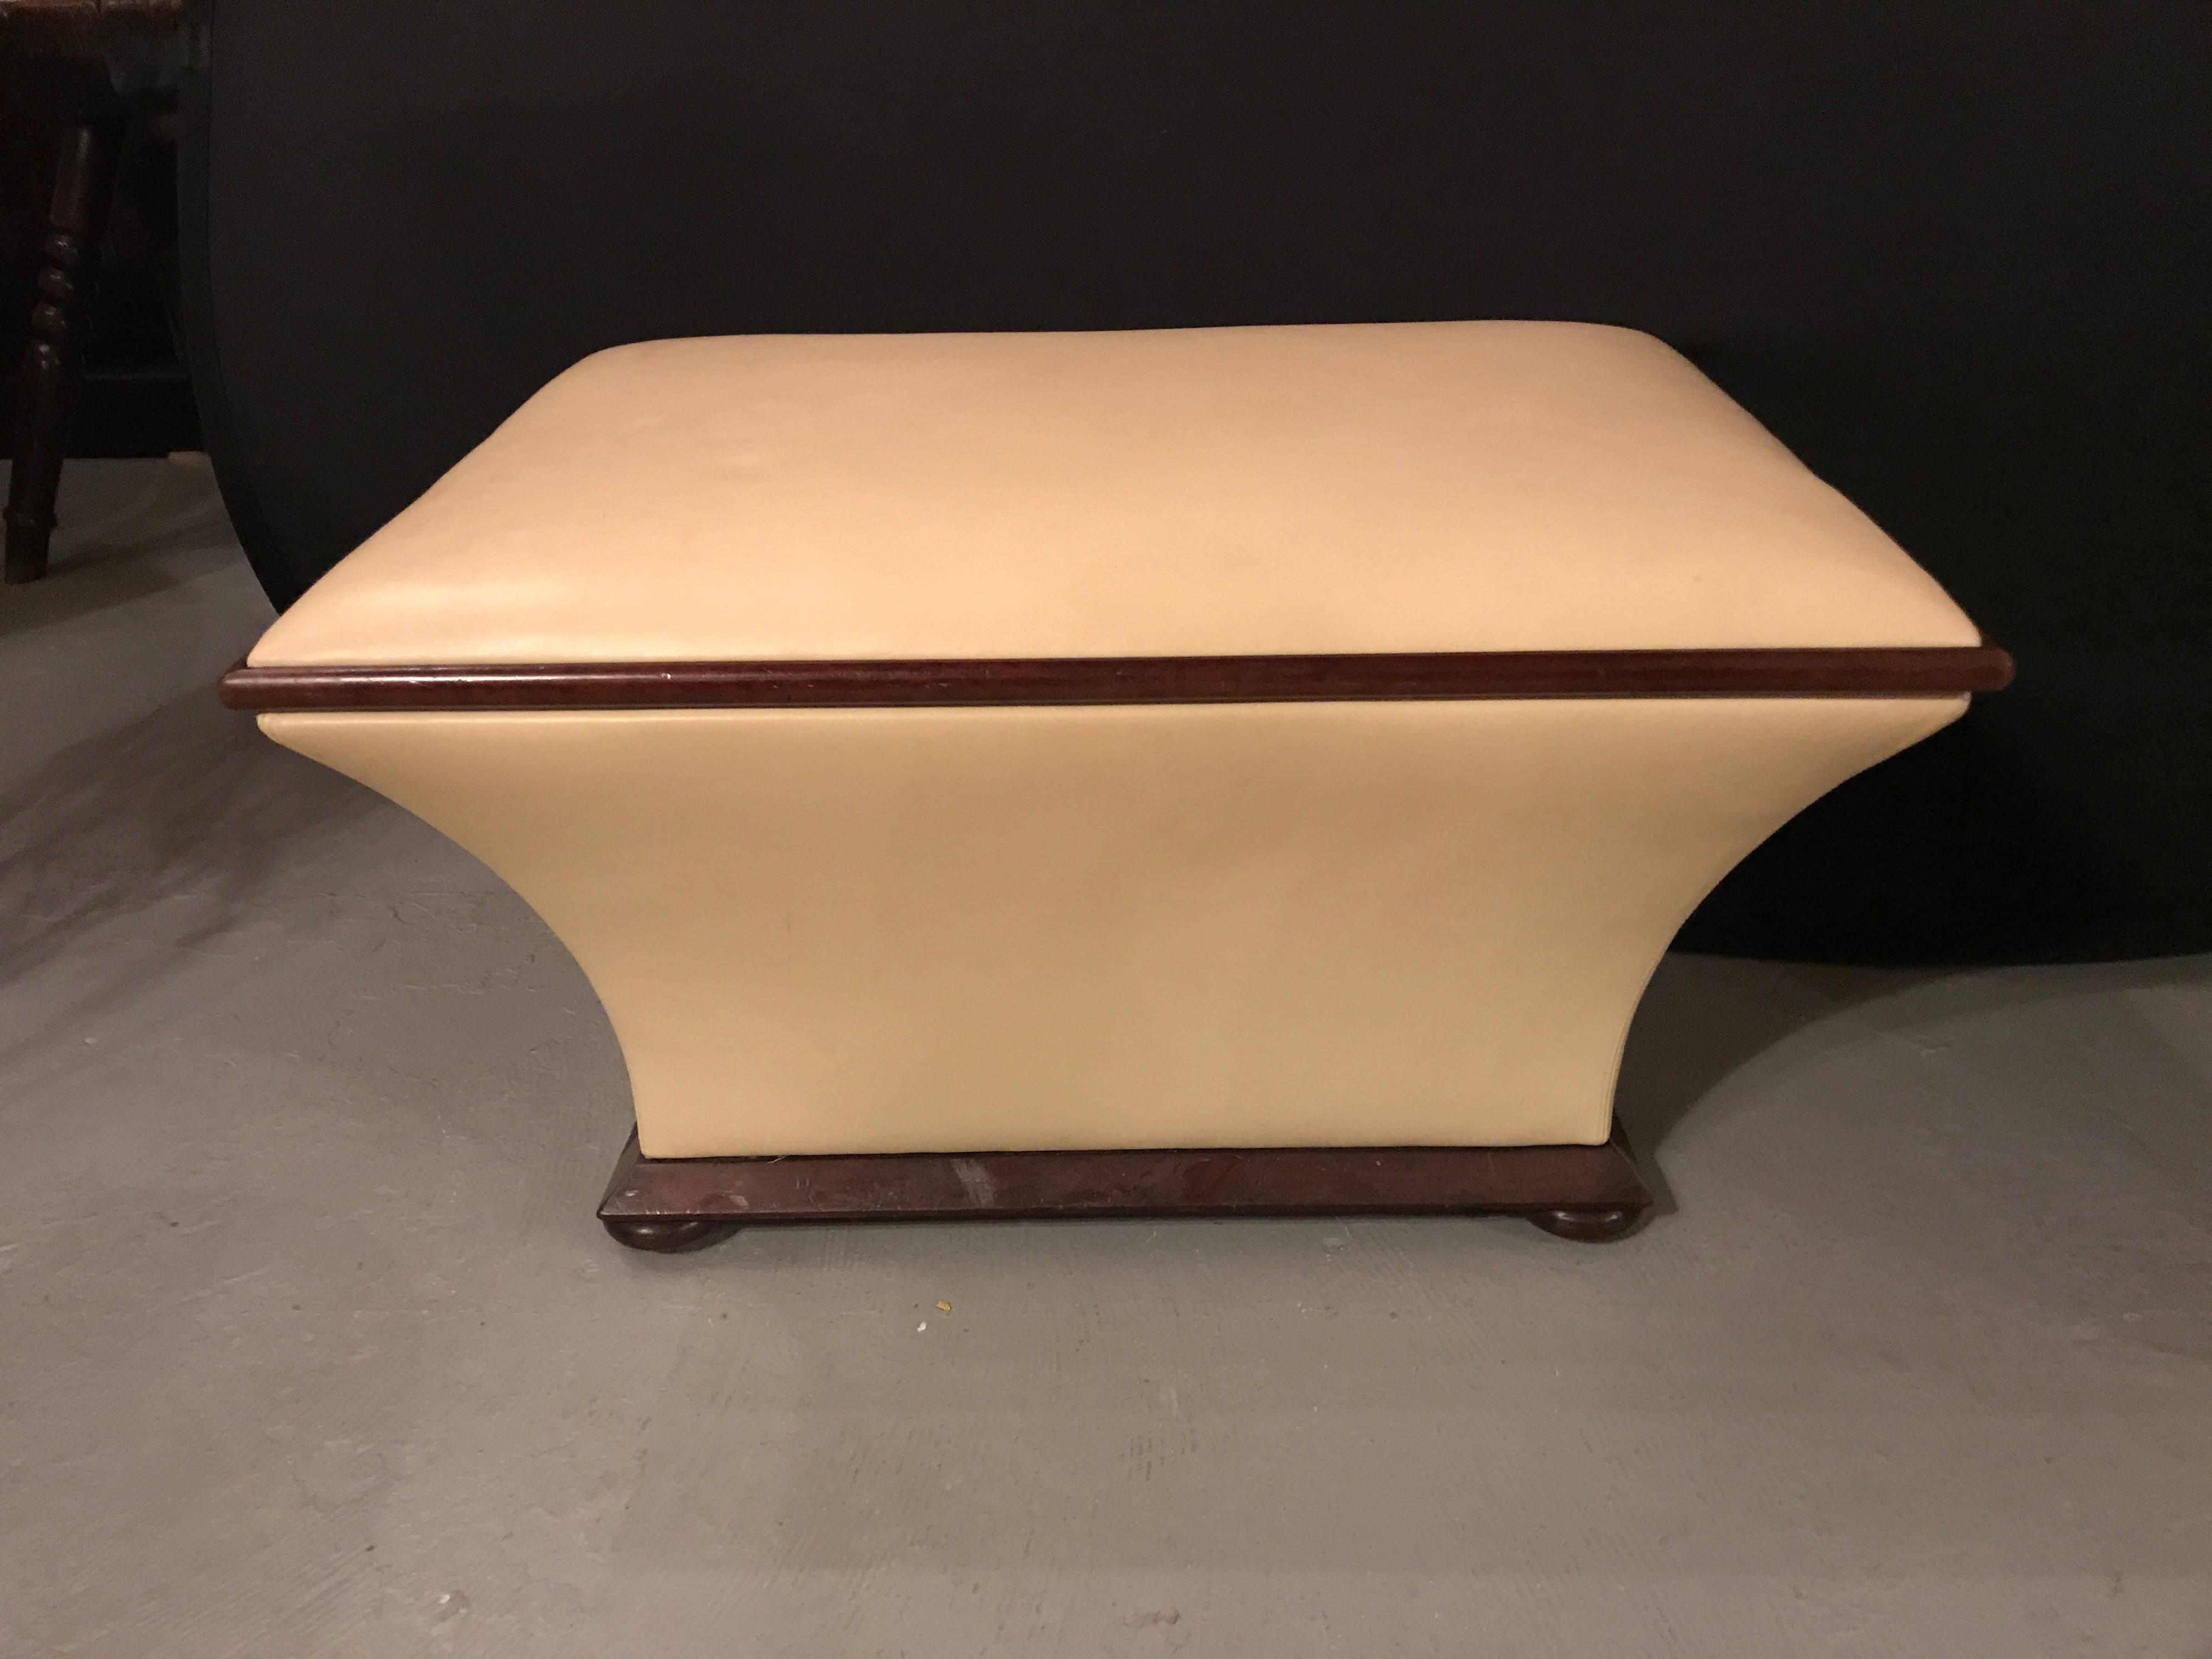 A Hollywood Regency style leather stool chest. Having sleek and defined lines this curved bench or footstool is comprised of mahogany trim and sits on bun feet. The tan leather frame has a pull up top with straps and leads to a large open interior